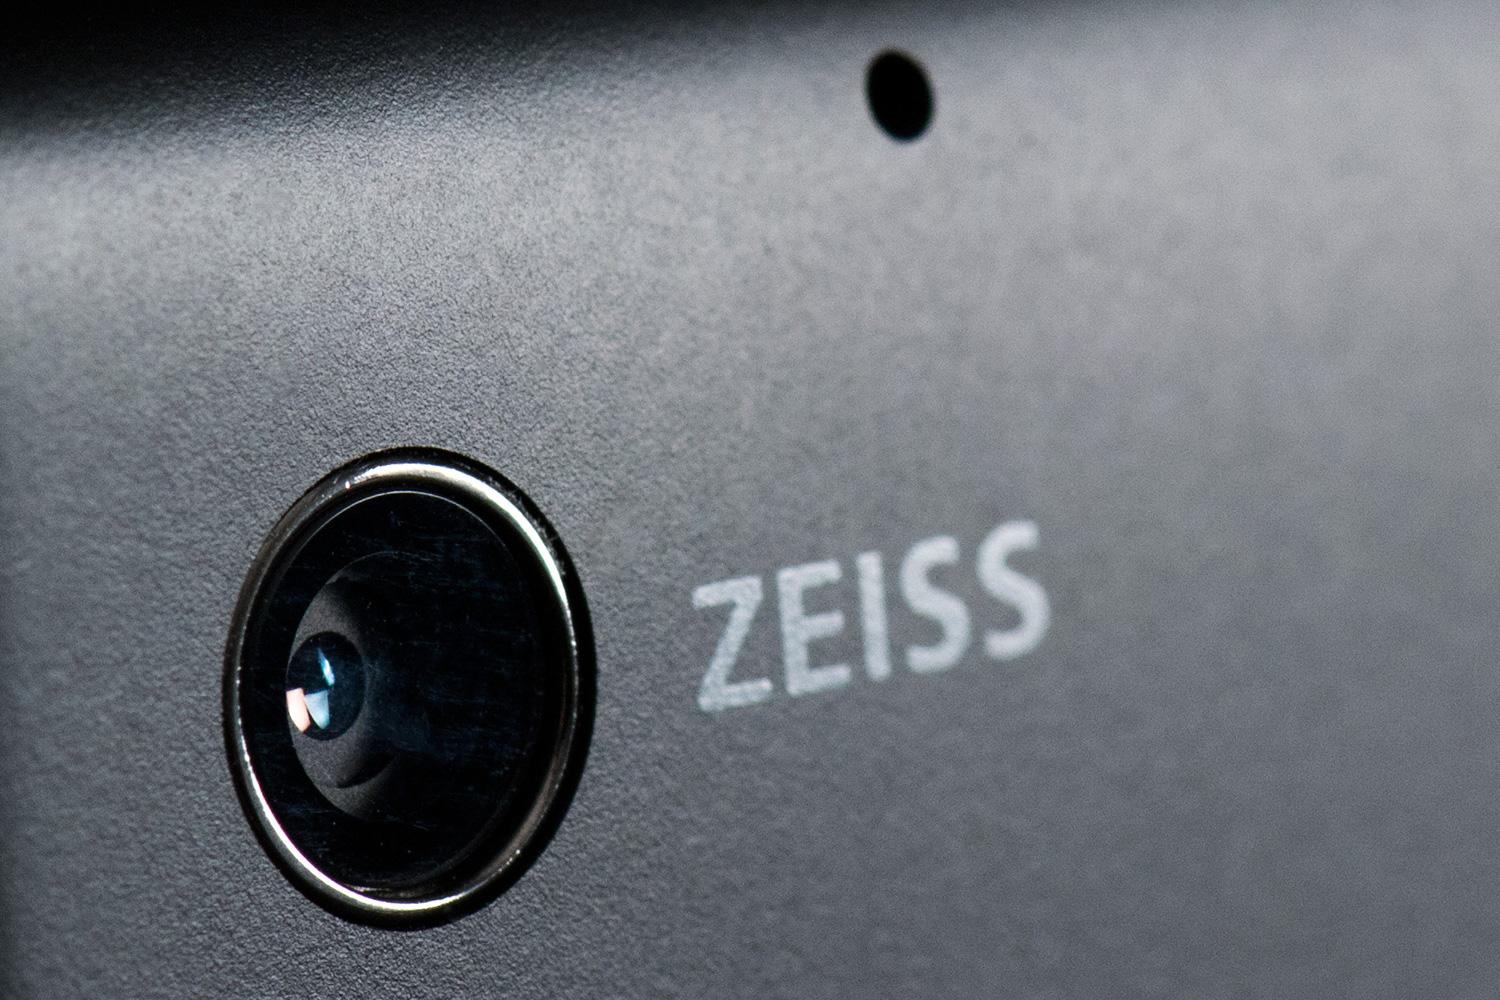 hmd global and zeiss tie-up to offer best ever cameras on nokia smartphones